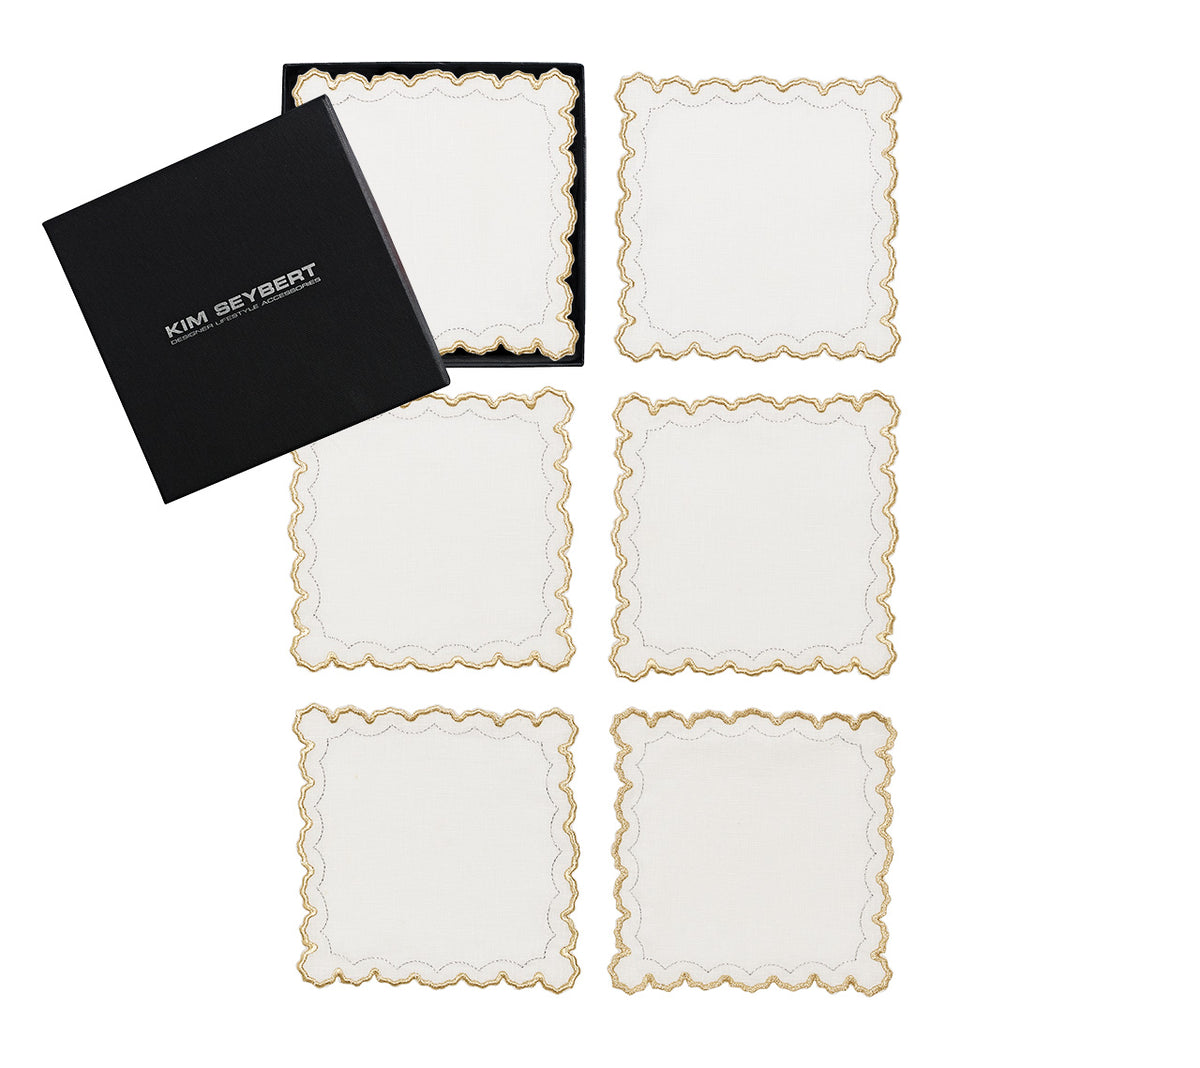 Kim Seybert Luxury Arches Cocktail Napkins in White, Gold & Silver, Set of 6 in a Gift Box